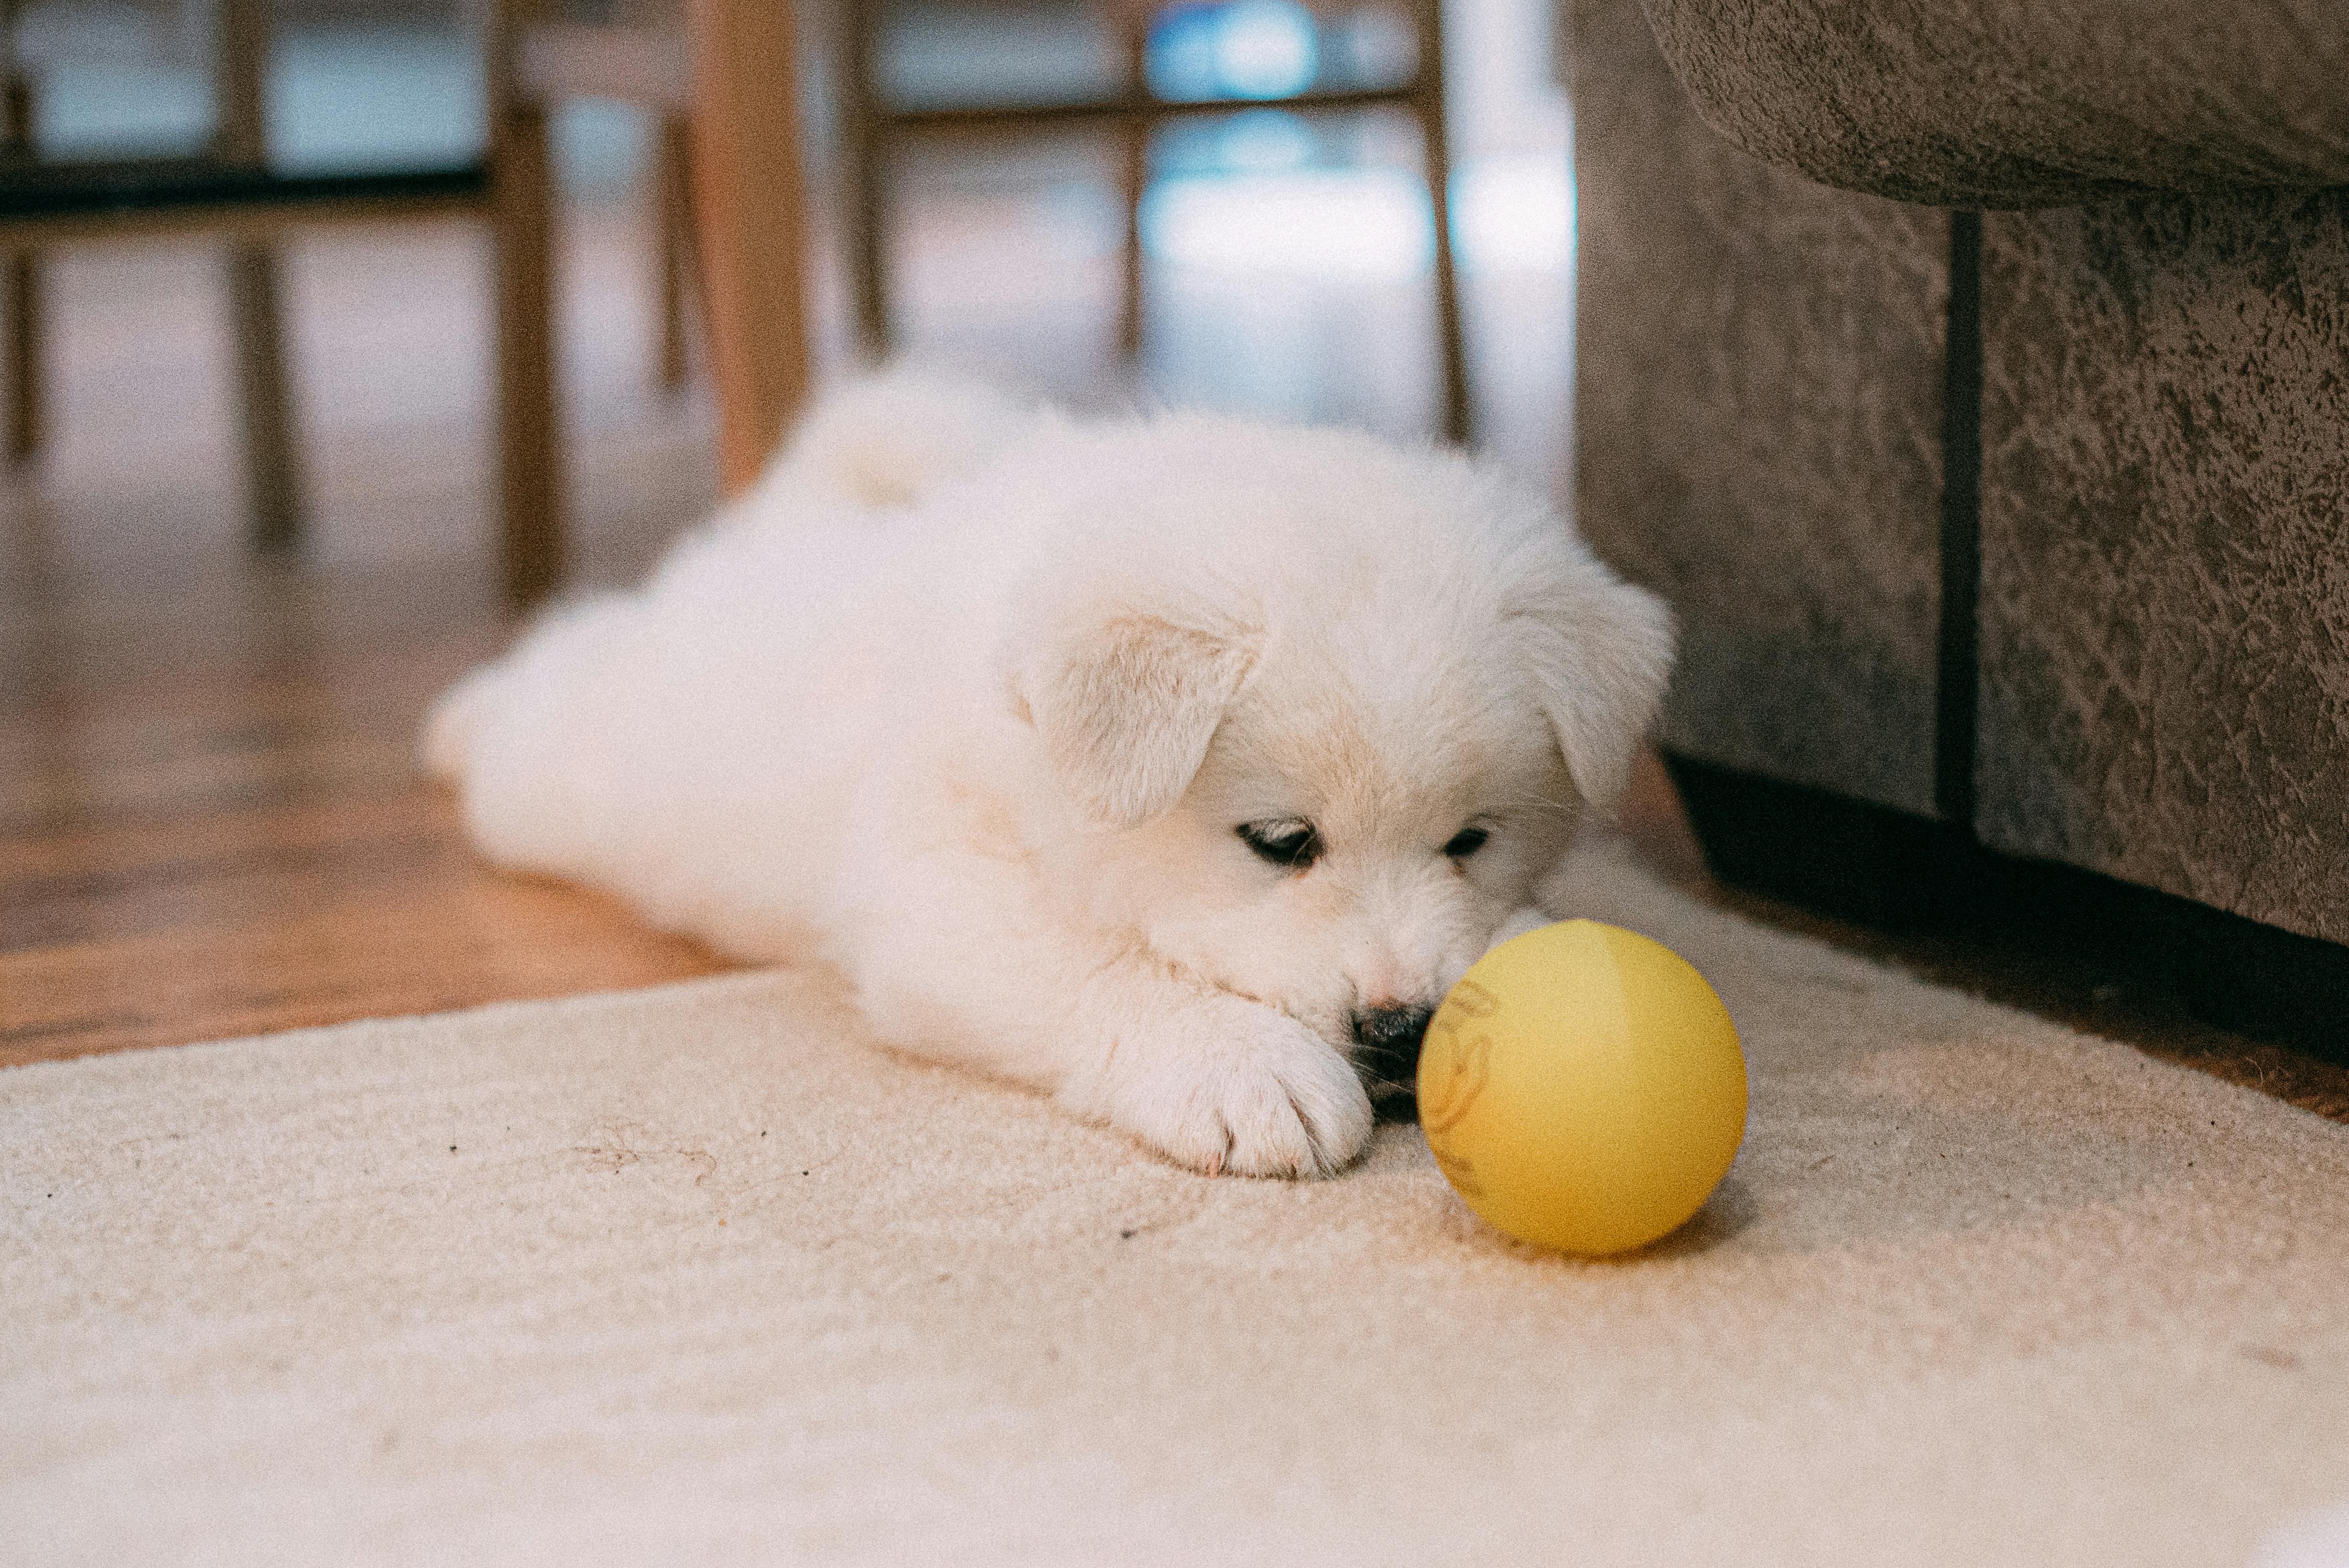 Puppy essentials: Comprehensive Guide to Caring for Your New Best Friend